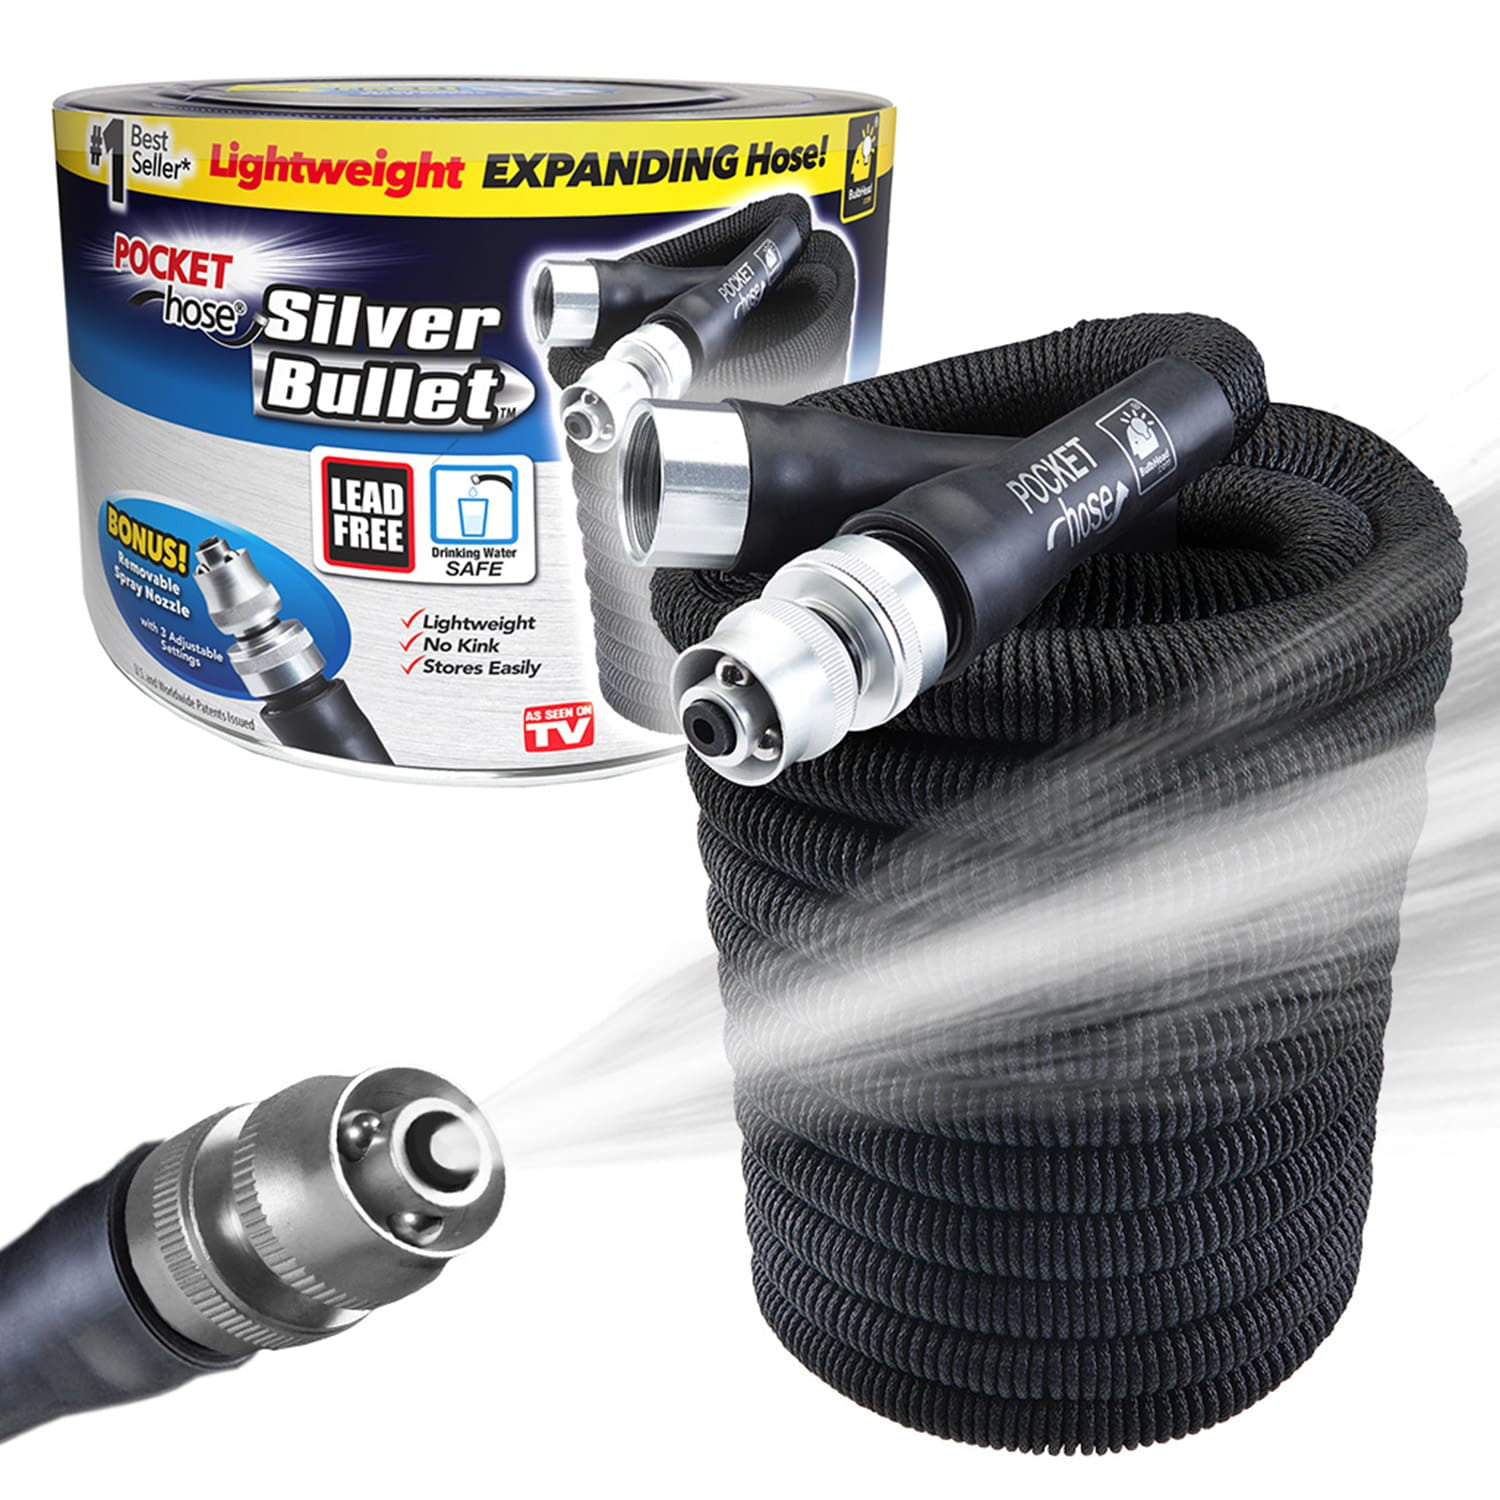 The Hose That Grows To 50 ft As Seen On TV Expandable Hose Non-Retail Packaging 